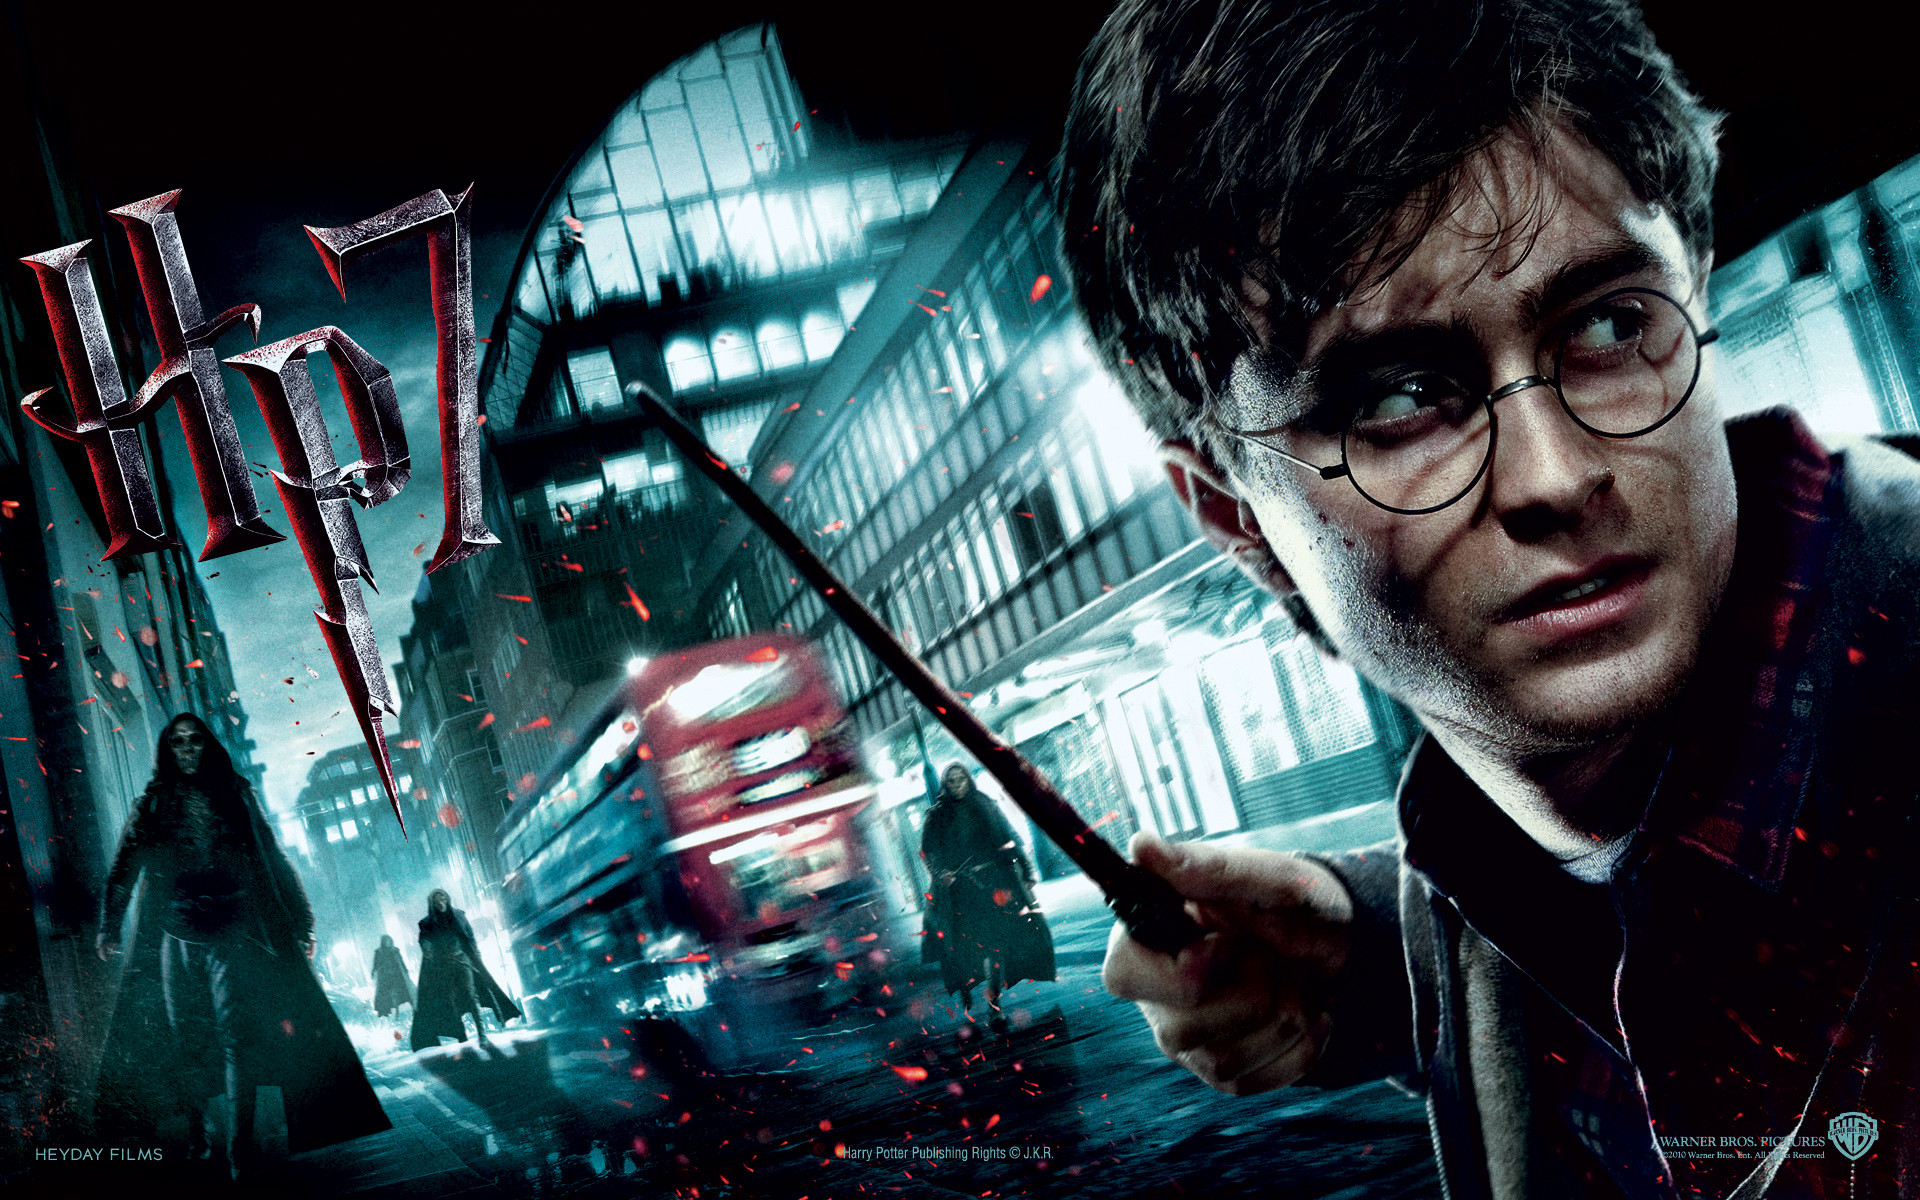 Harry potter Wallpapers Download